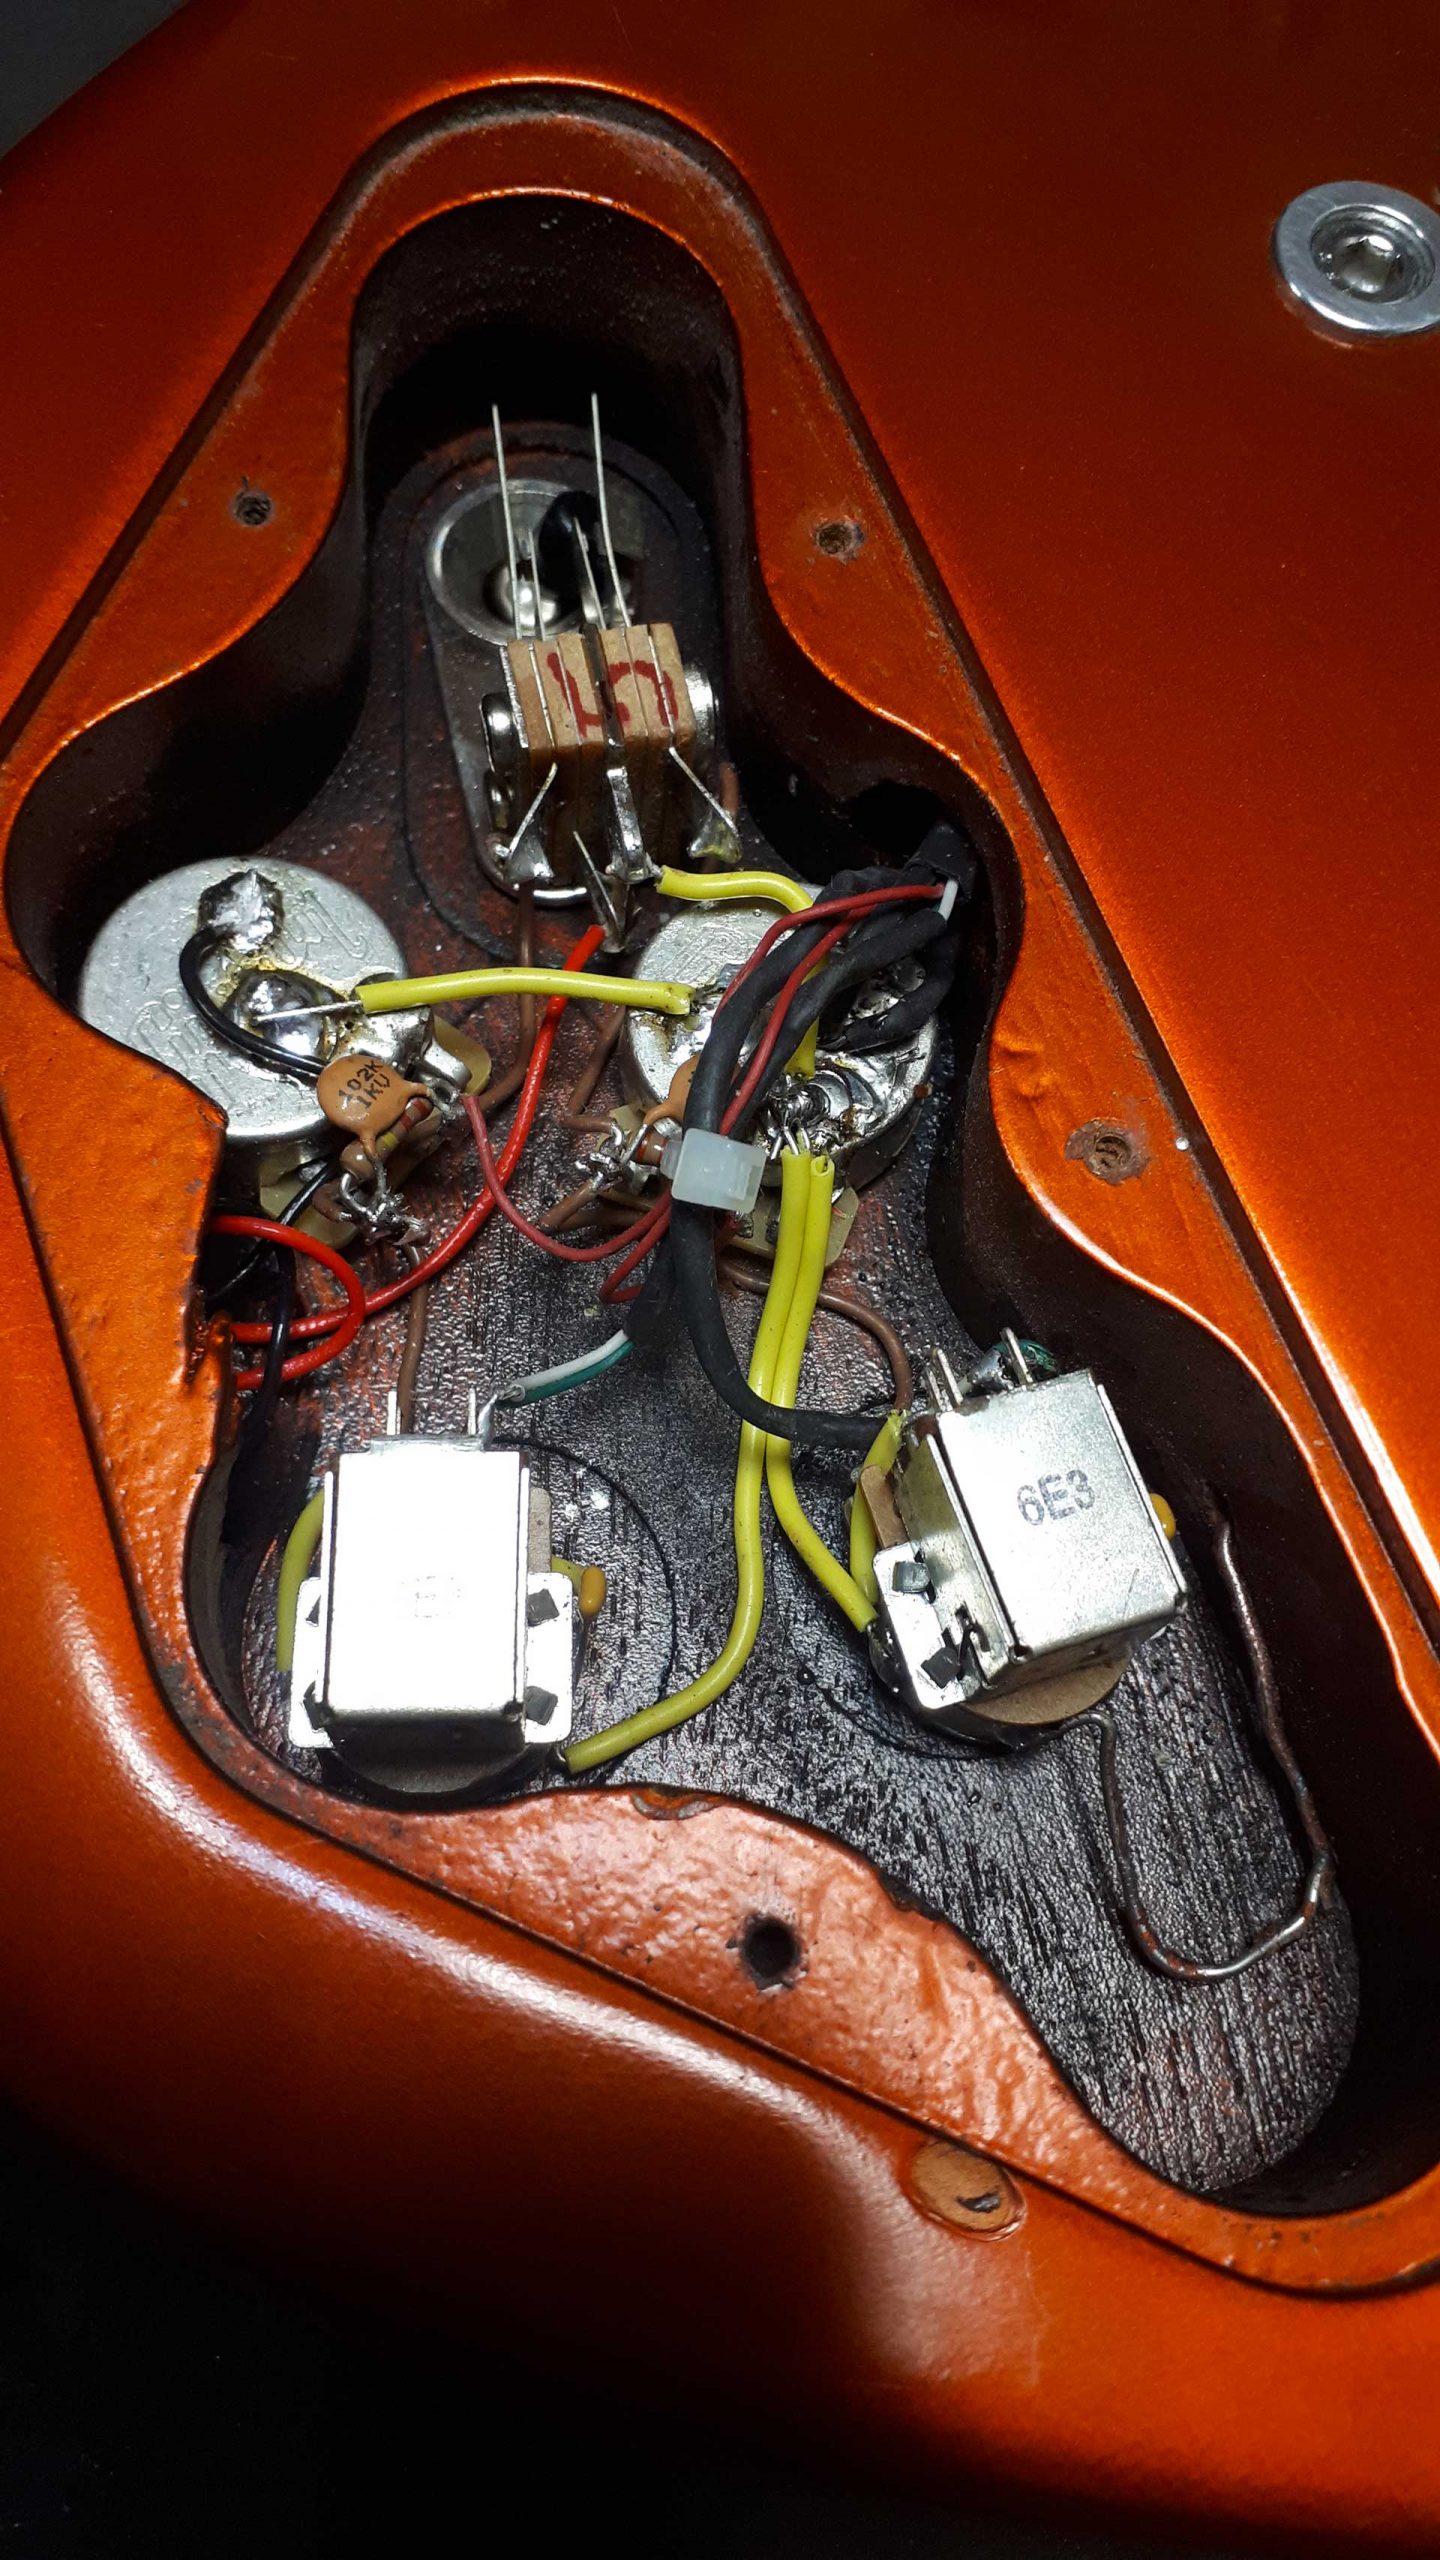 Wiring on different types of guitars SG Stratocaster Telecaster and Flying V